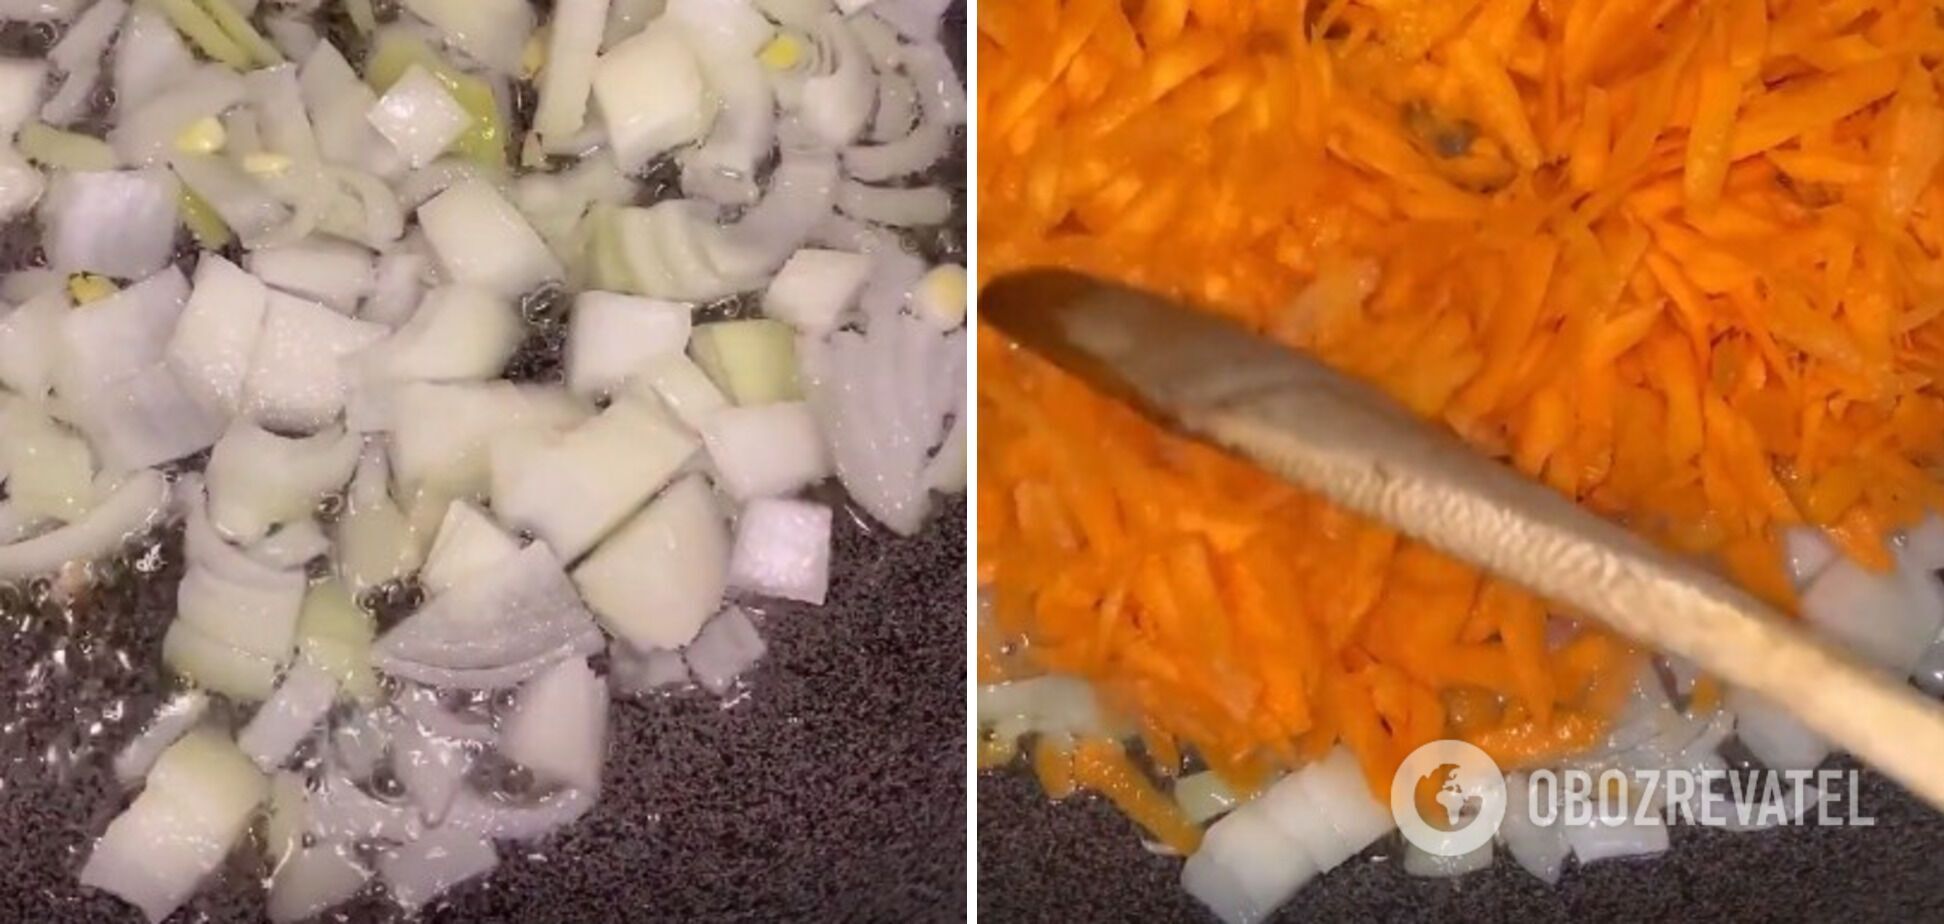 Onions and carrots